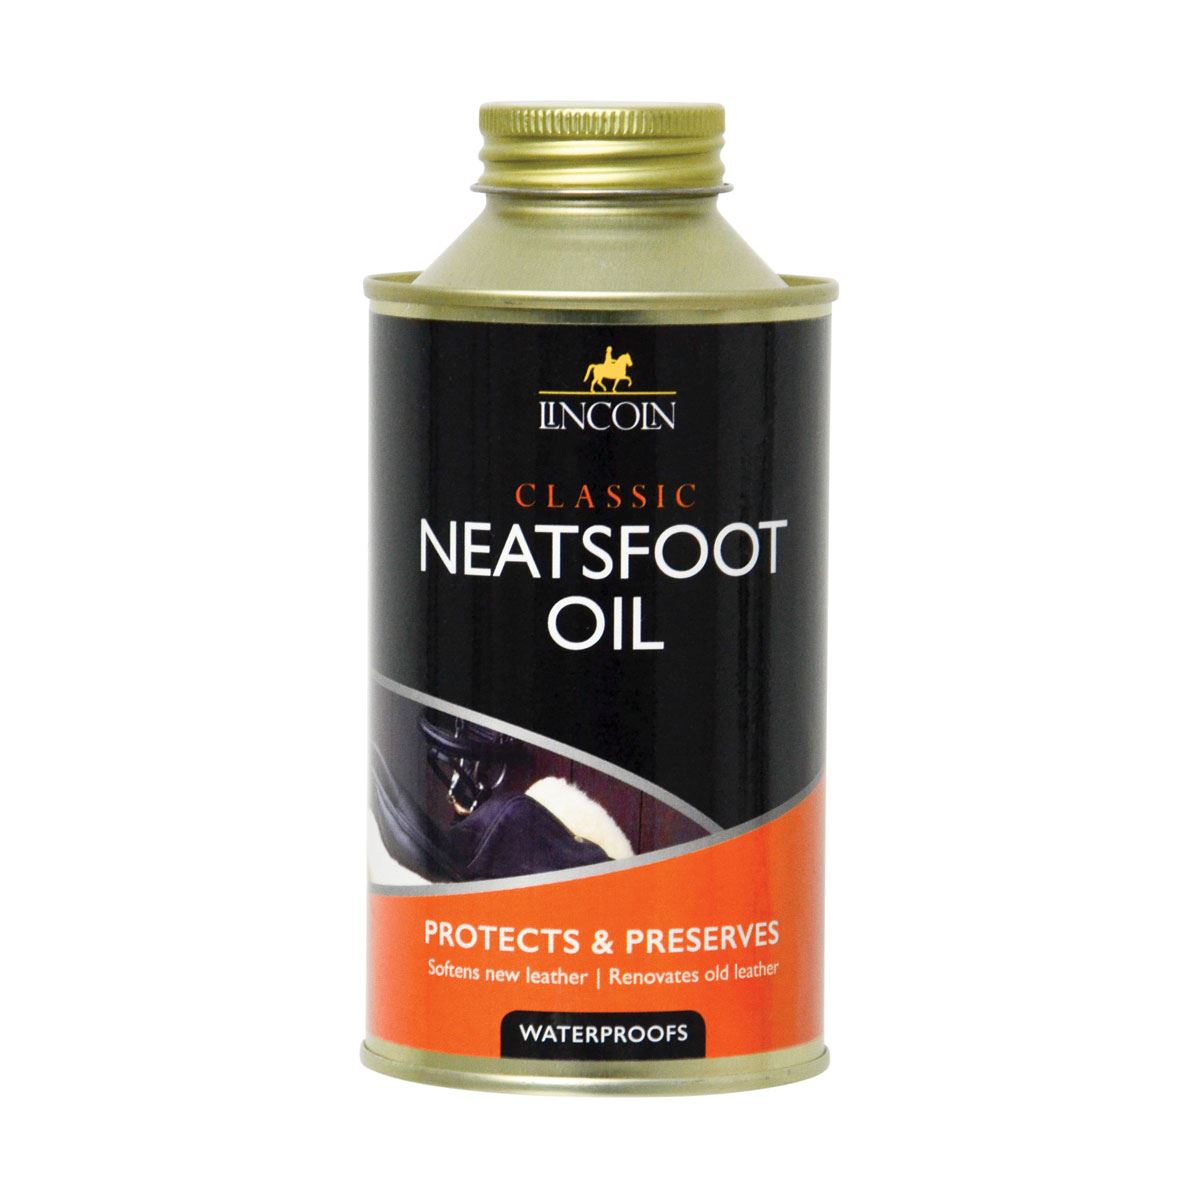 Lincoln Classic Neatsfoot Oil for leather conditioning